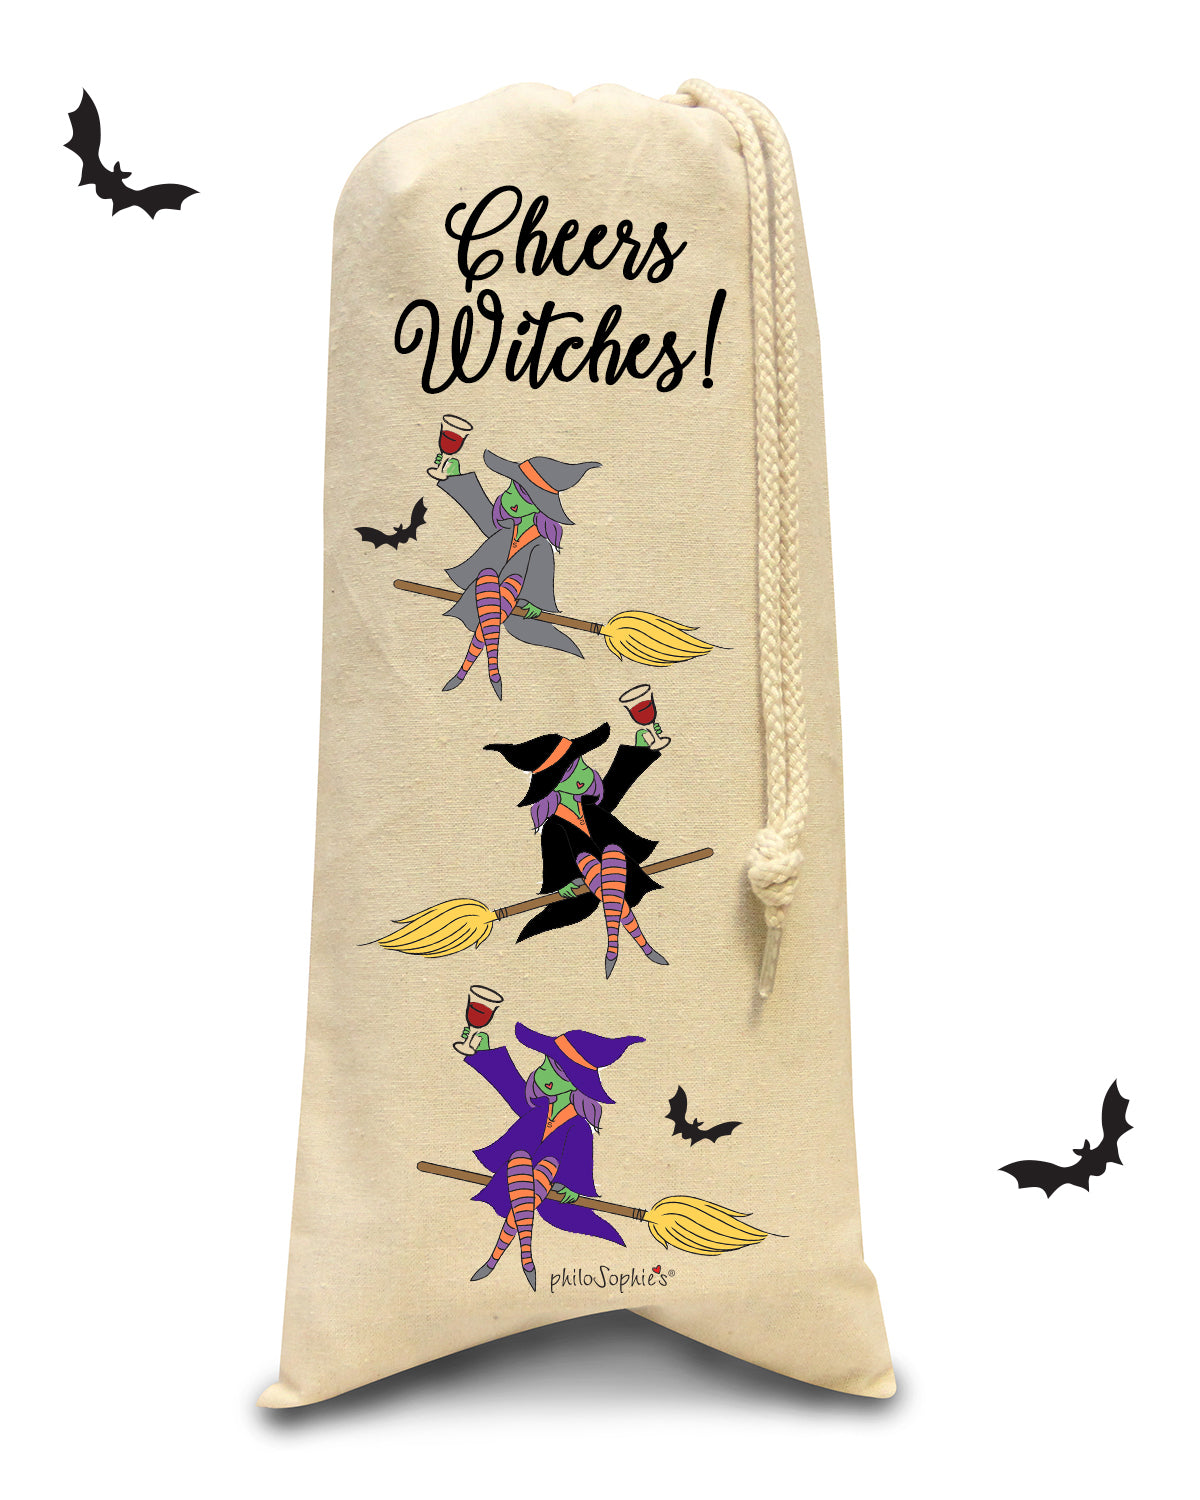 Cheers Witches! Wine Tote - philoSophie's®